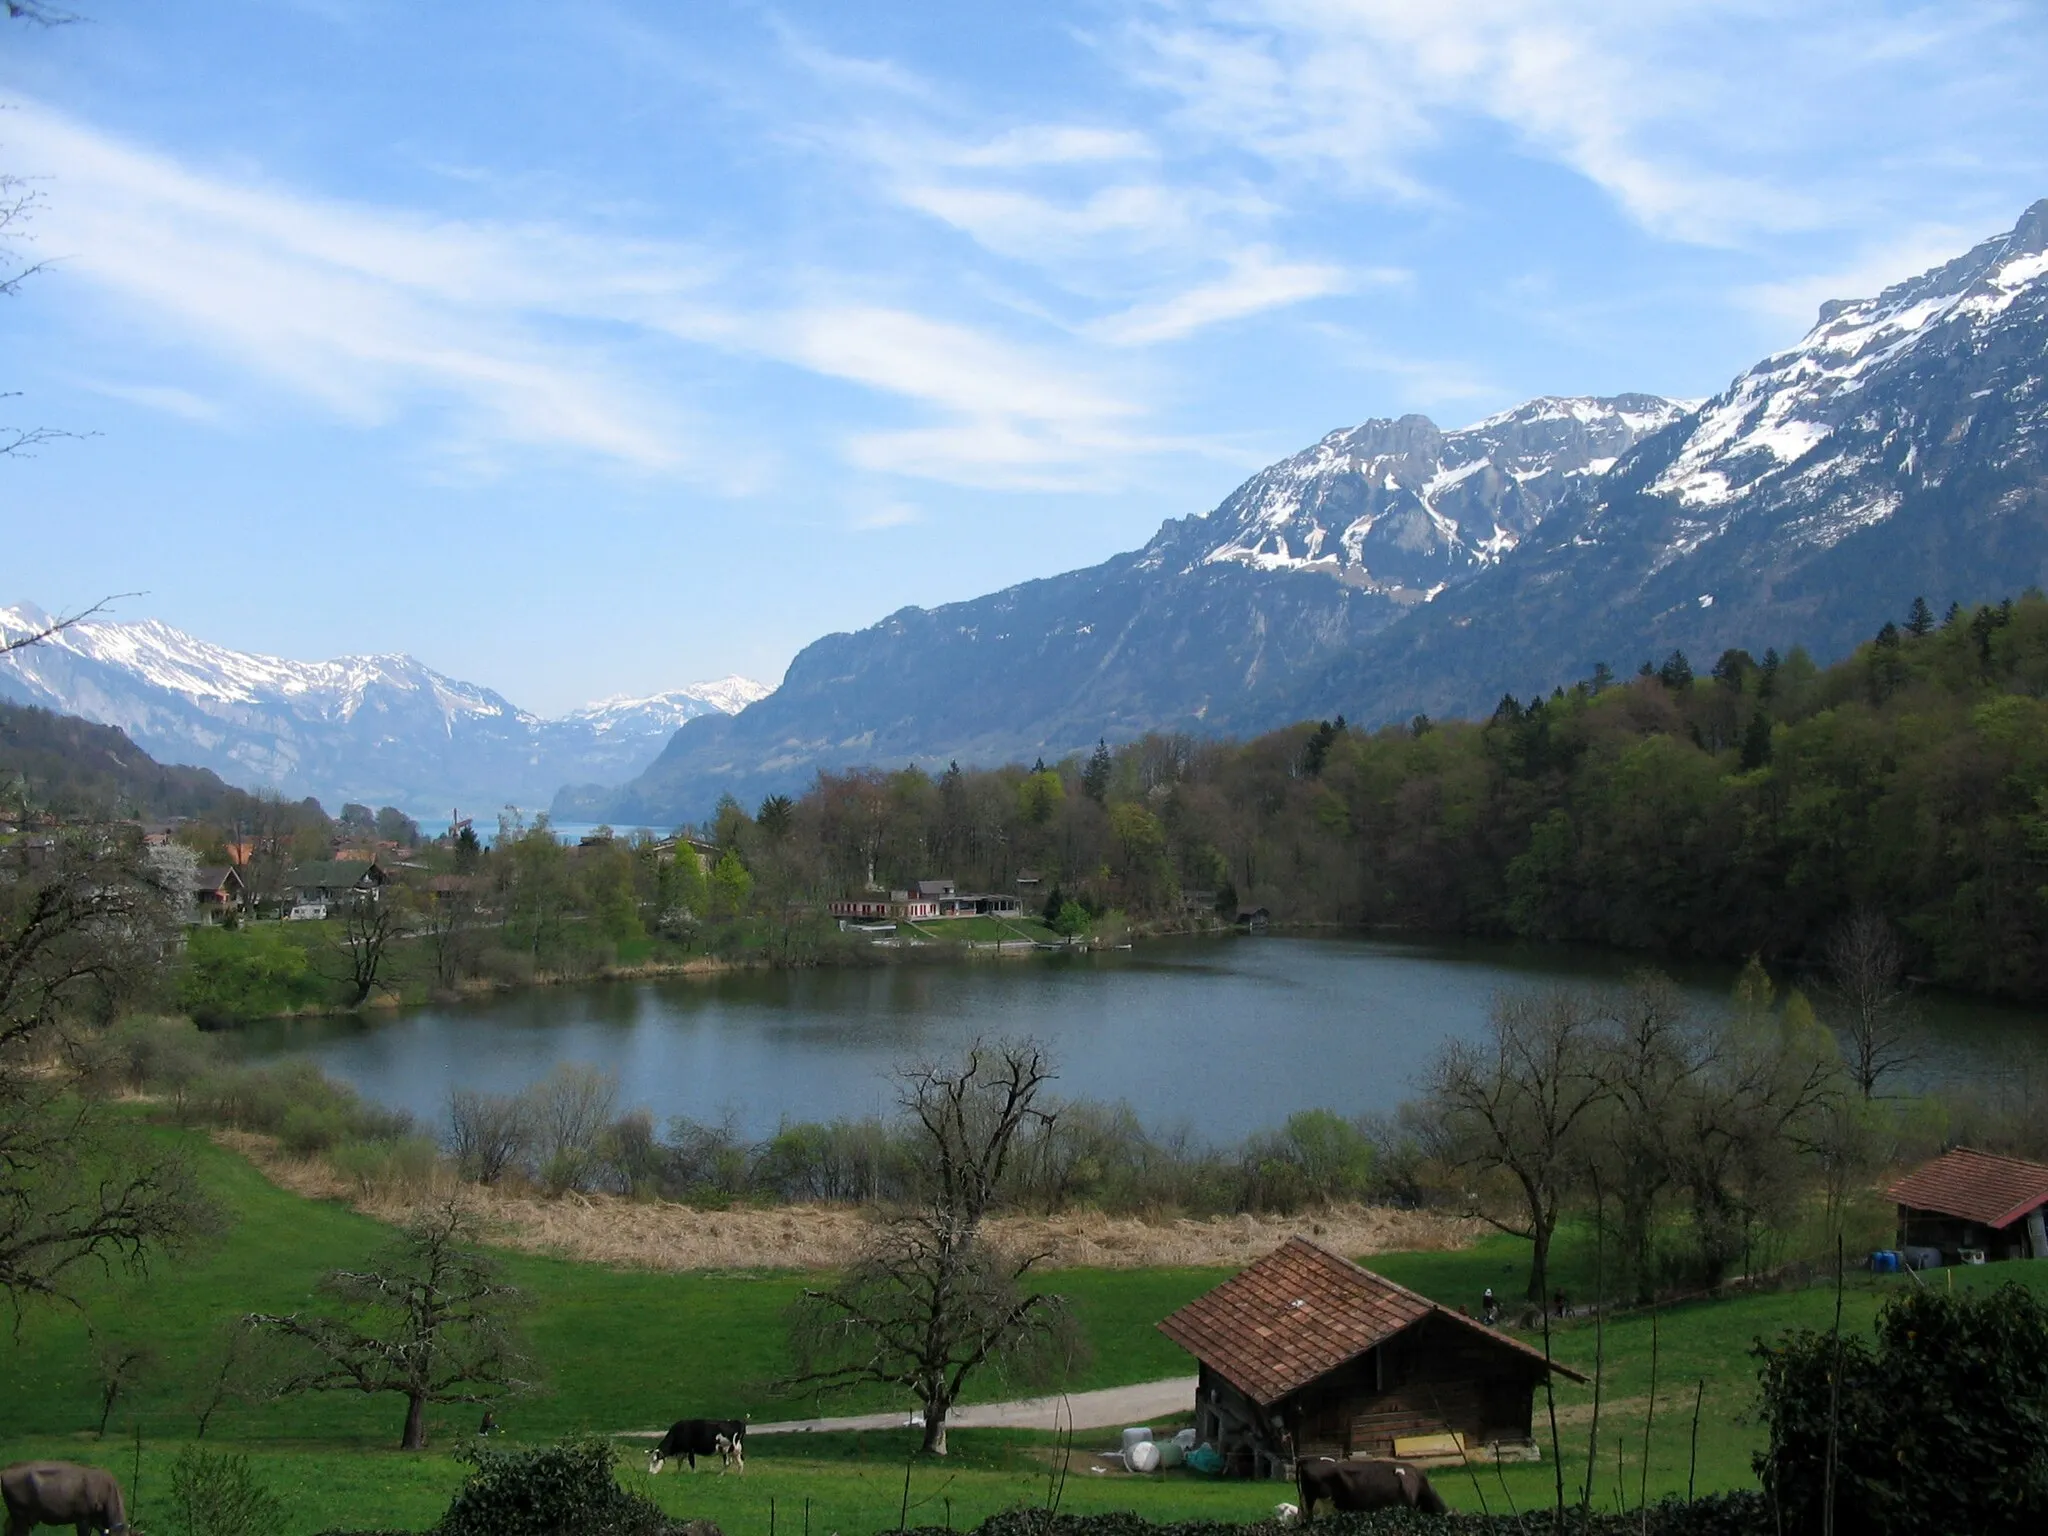 Photo showing: The Burgseeli (=little castle lake) between the villages Ringgenberg and Goldswil in the Bernese Oberland (Canton of Berne / Switzerland).